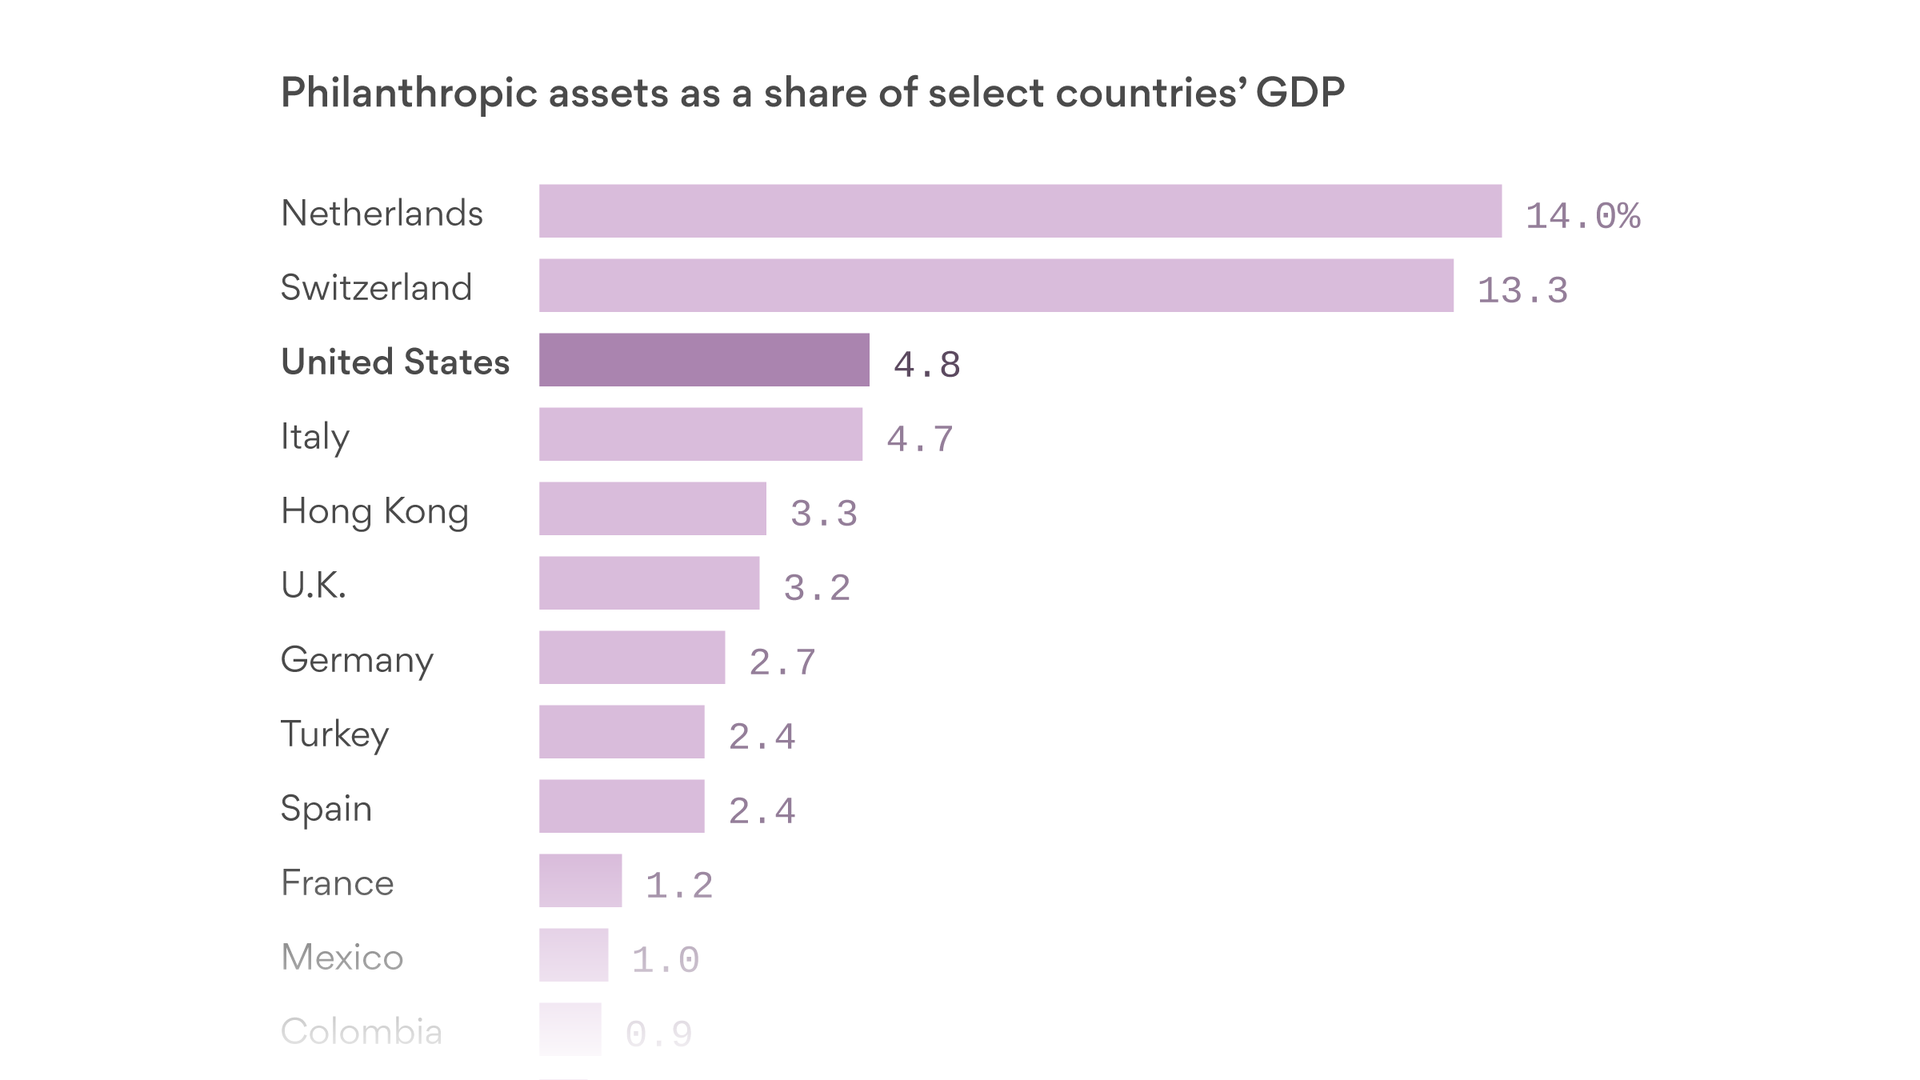 Ranking countries by how much of their GDP is held by philanthropies